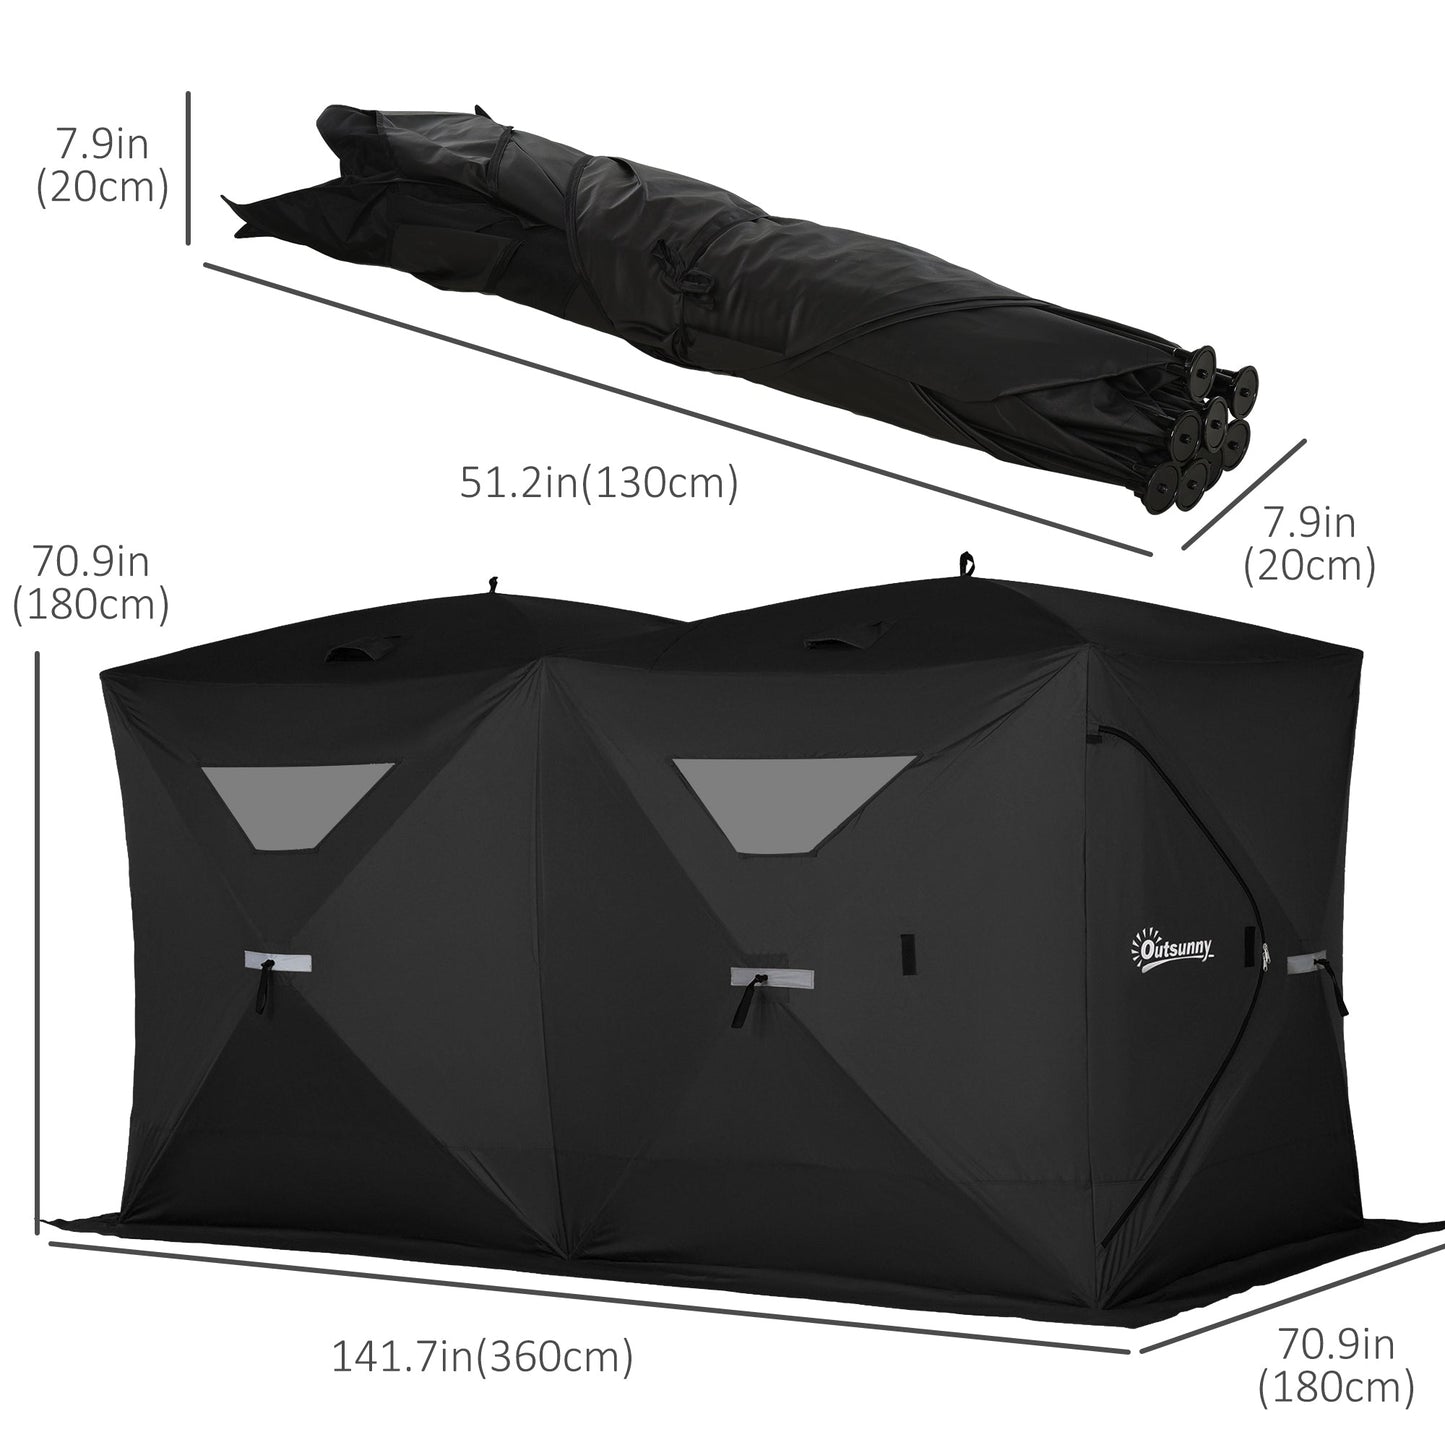 5-8 Person Pop-up Ice Fishing Shelter, Portable Ice Fishing Tent, Black Ice Fishing Tents   at Gallery Canada